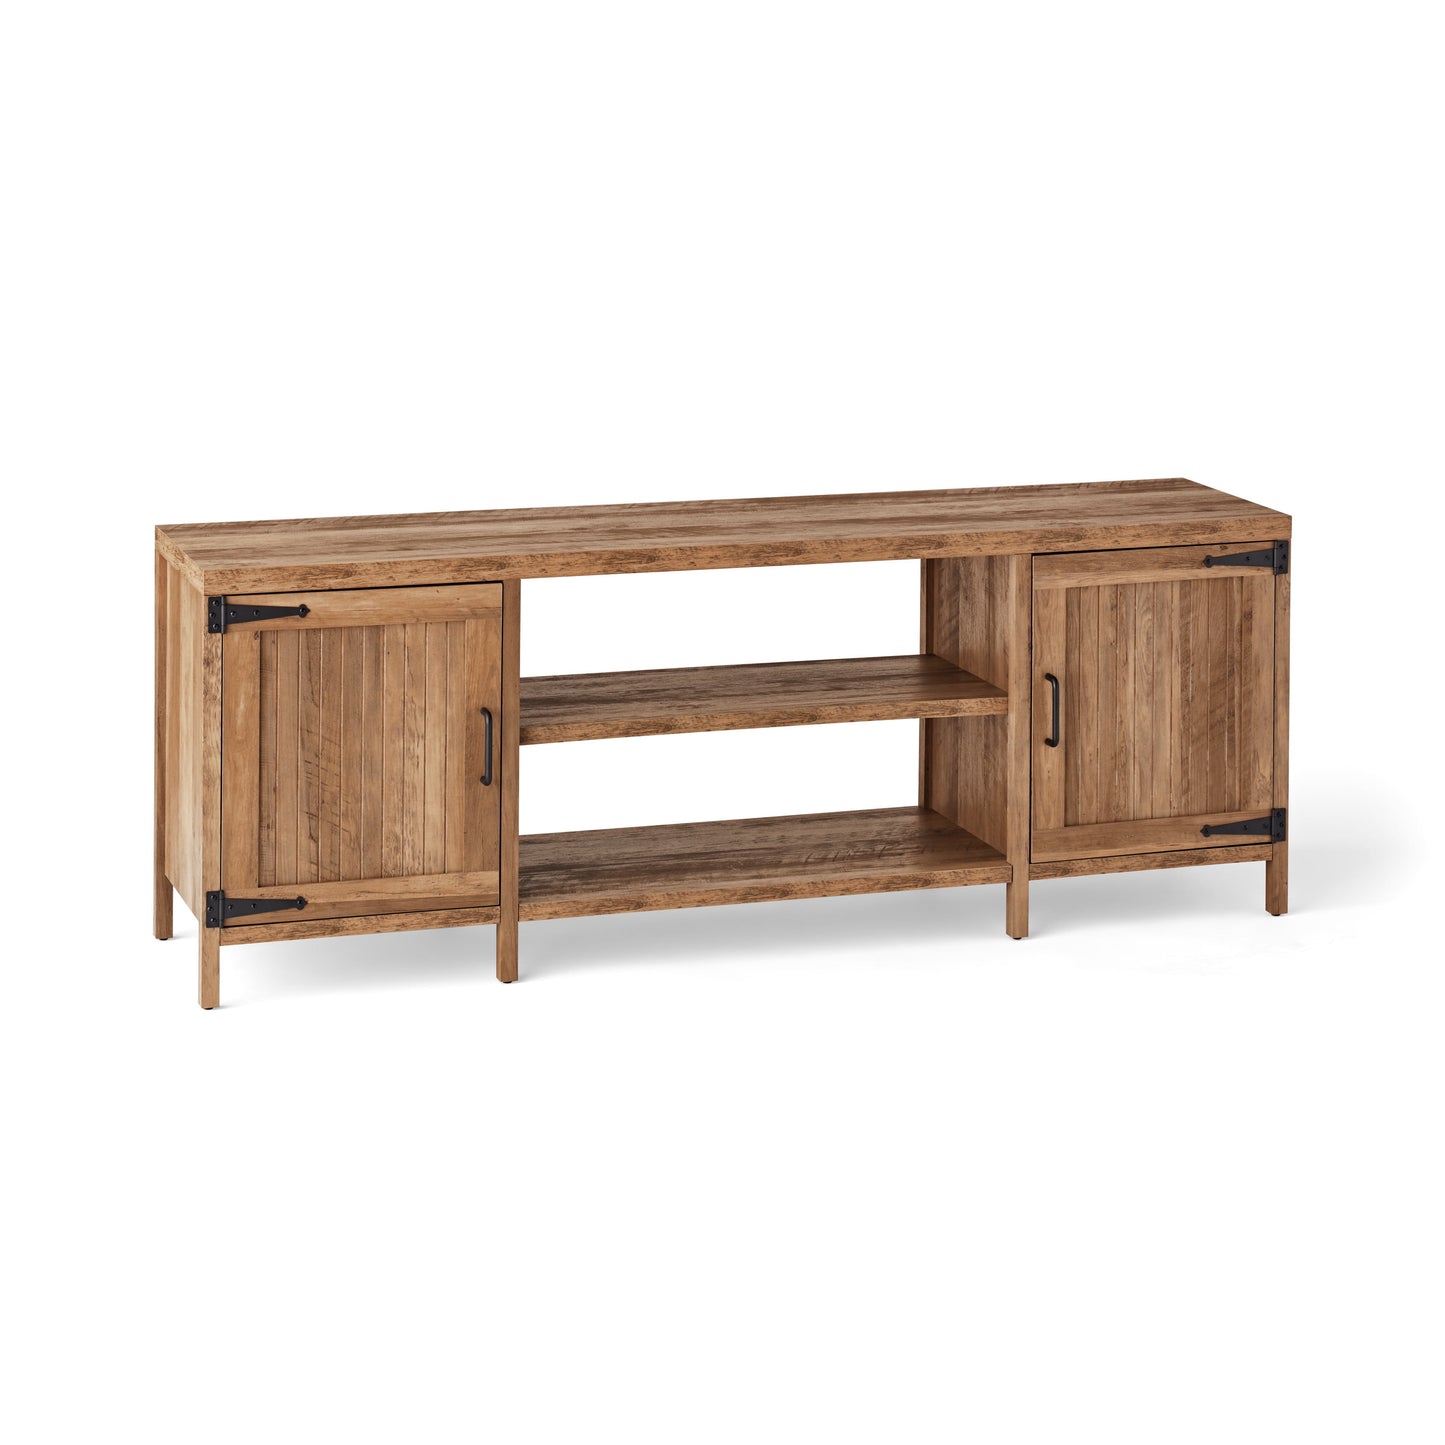 Farmhouse TV Stand for Tvs up to 70", Rustic Weathered Oak